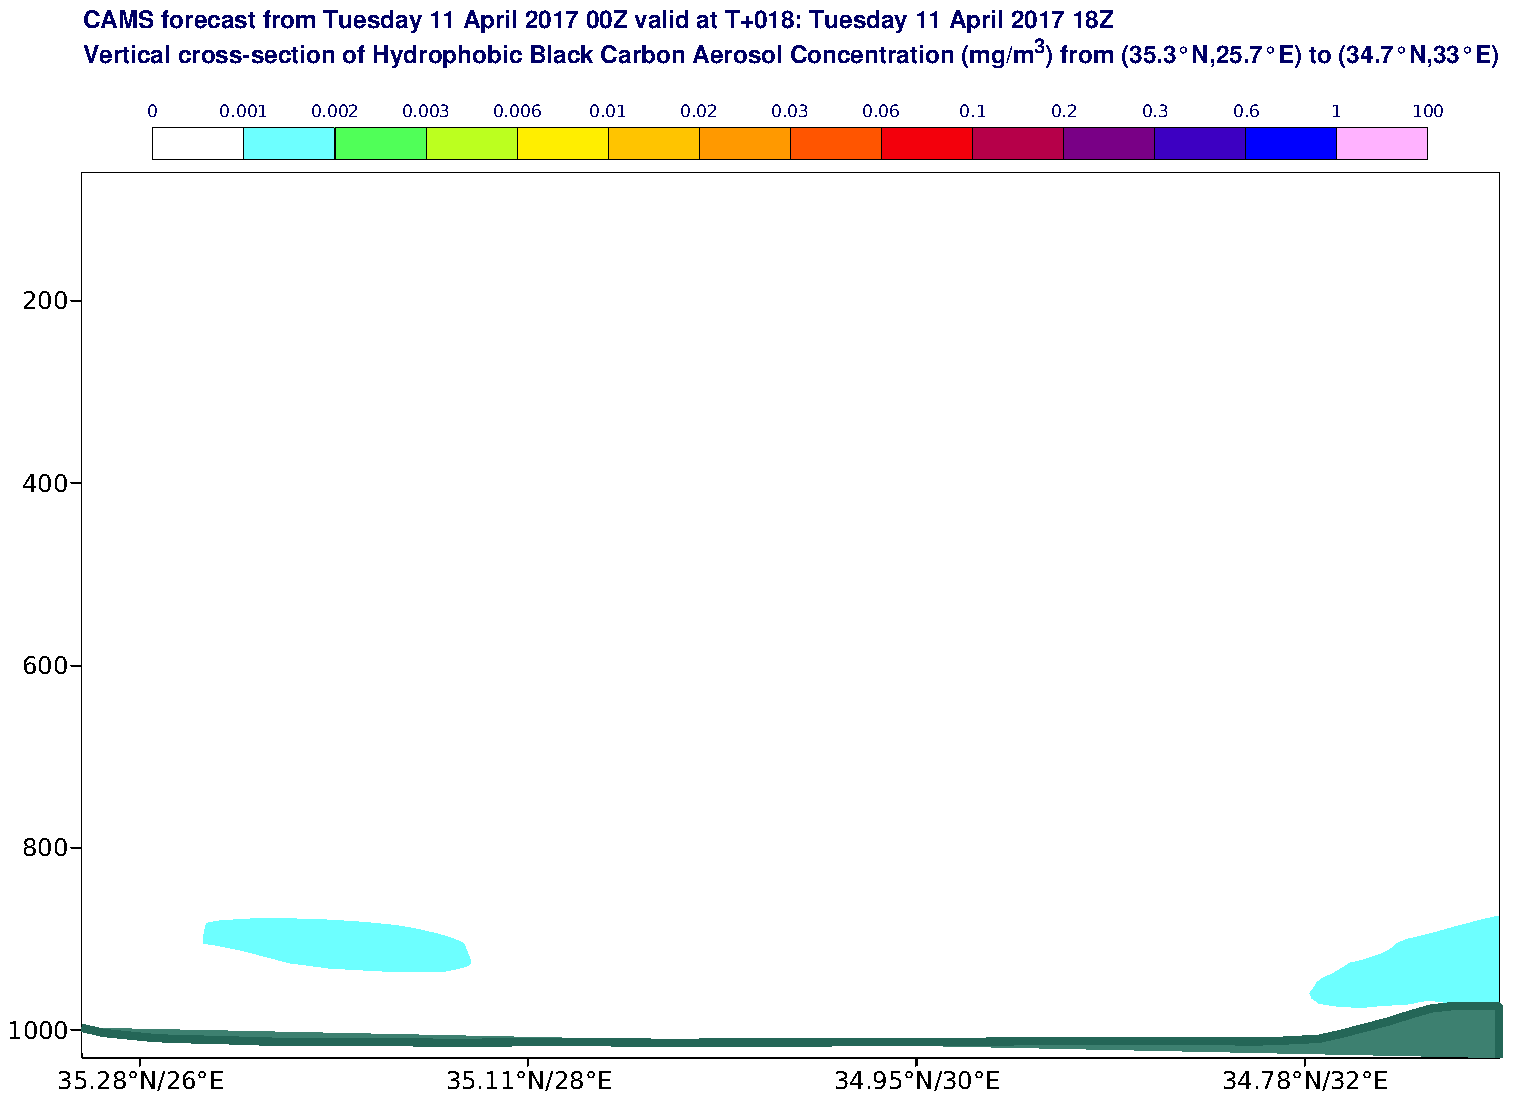 Vertical cross-section of Hydrophobic Black Carbon Aerosol Concentration (mg/m3) valid at T18 - 2017-04-11 18:00